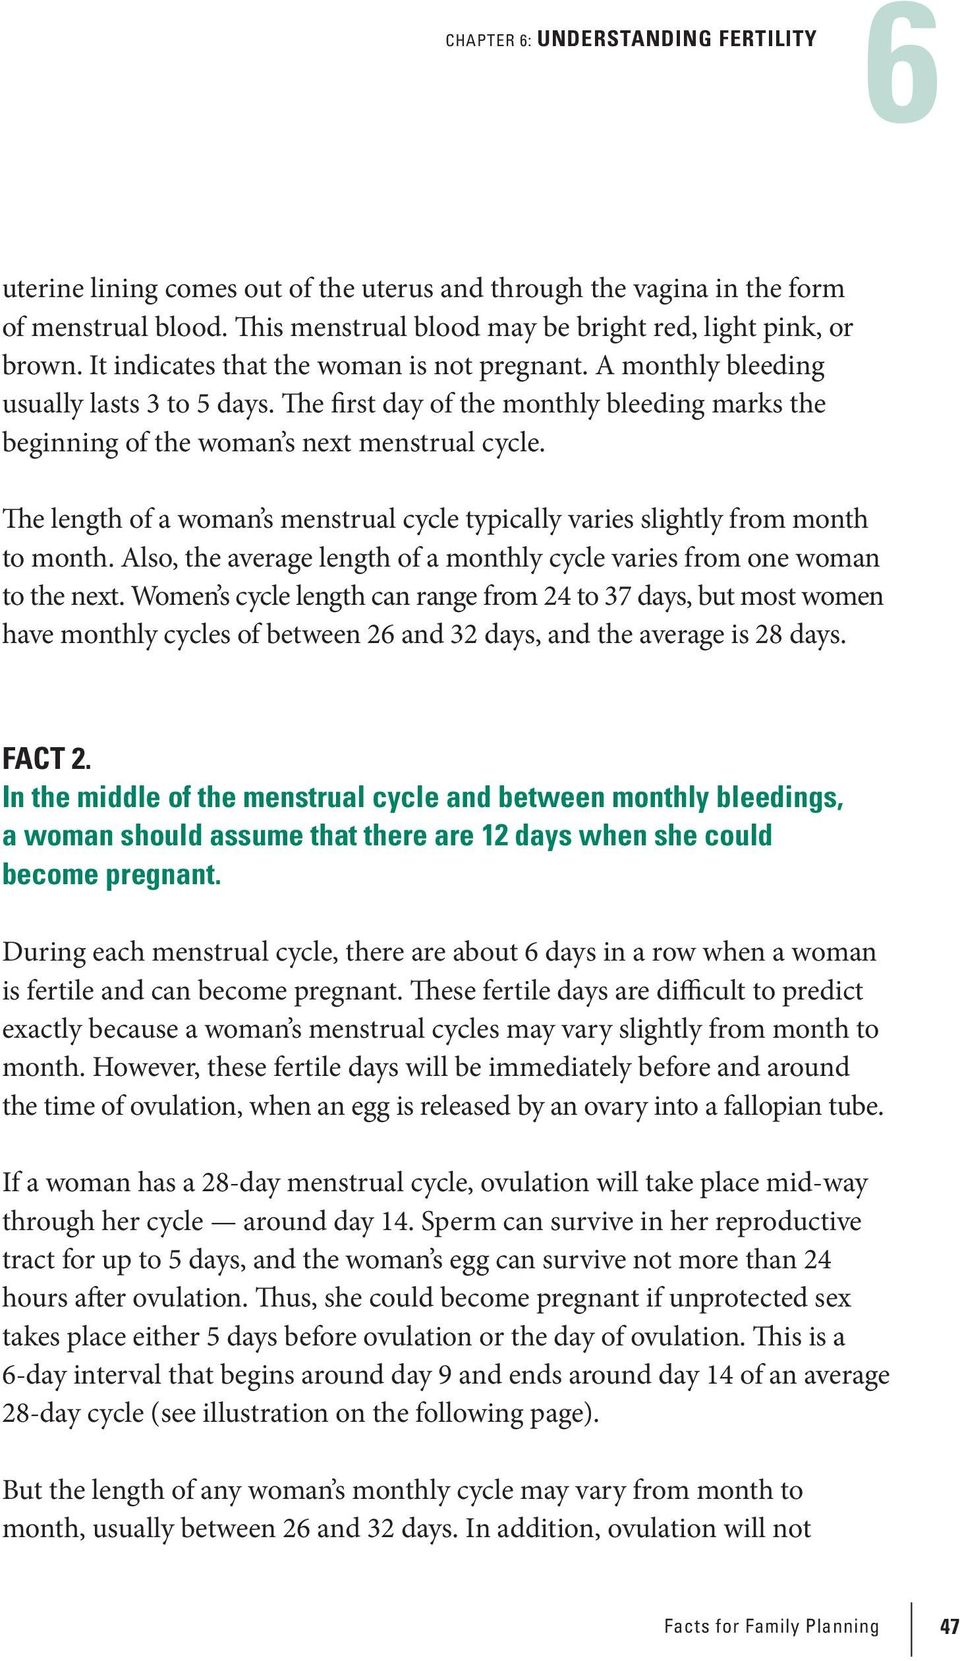 The length of a woman s menstrual cycle typically varies slightly from month to month. Also, the average length of a monthly cycle varies from one woman to the next.